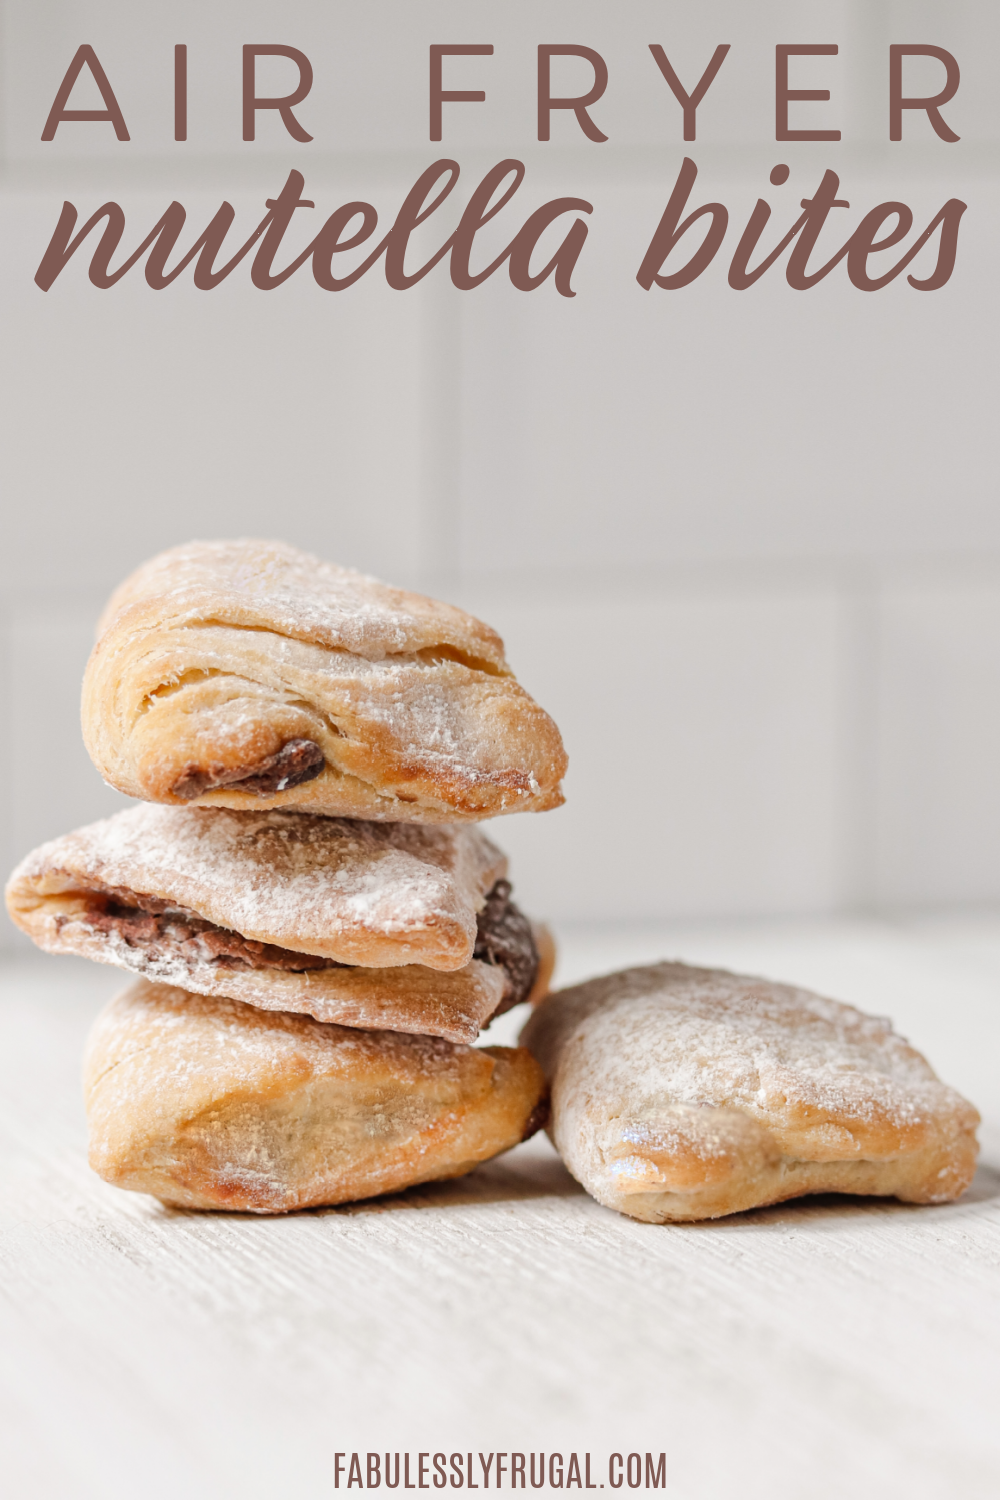 You got to try these Nutella bites in the air fryer because they are quick, fluffy, and so good! 